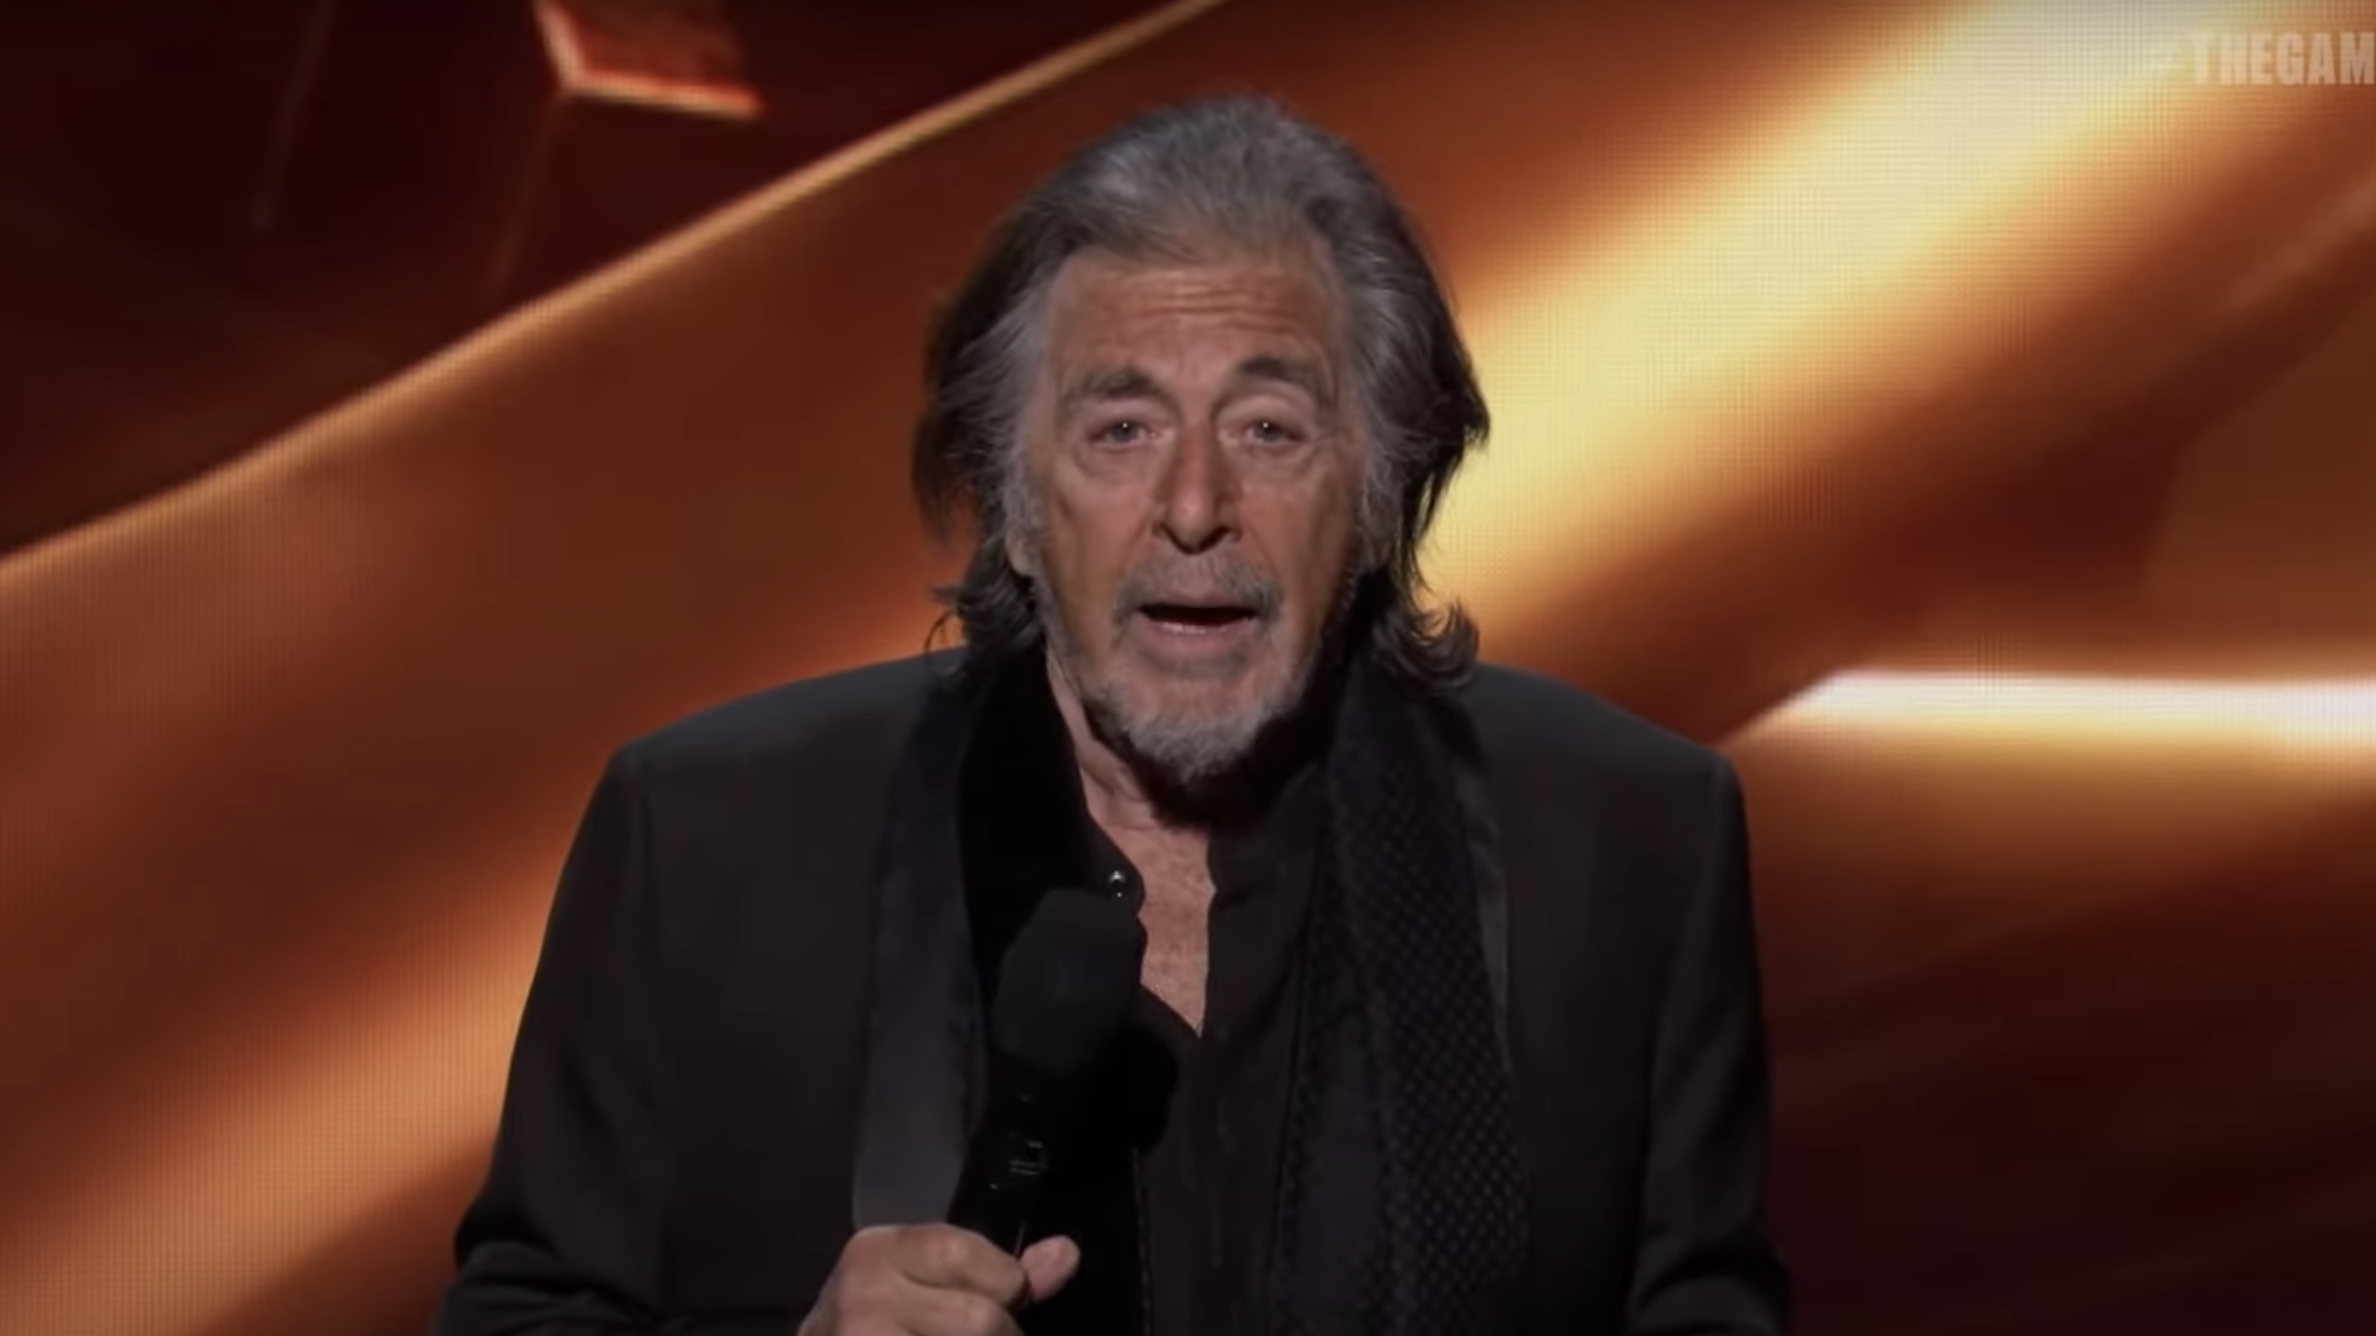 File:Al Pacino presenting Best Performance, The Game Awards 2022  (cropped).png - Wikipedia